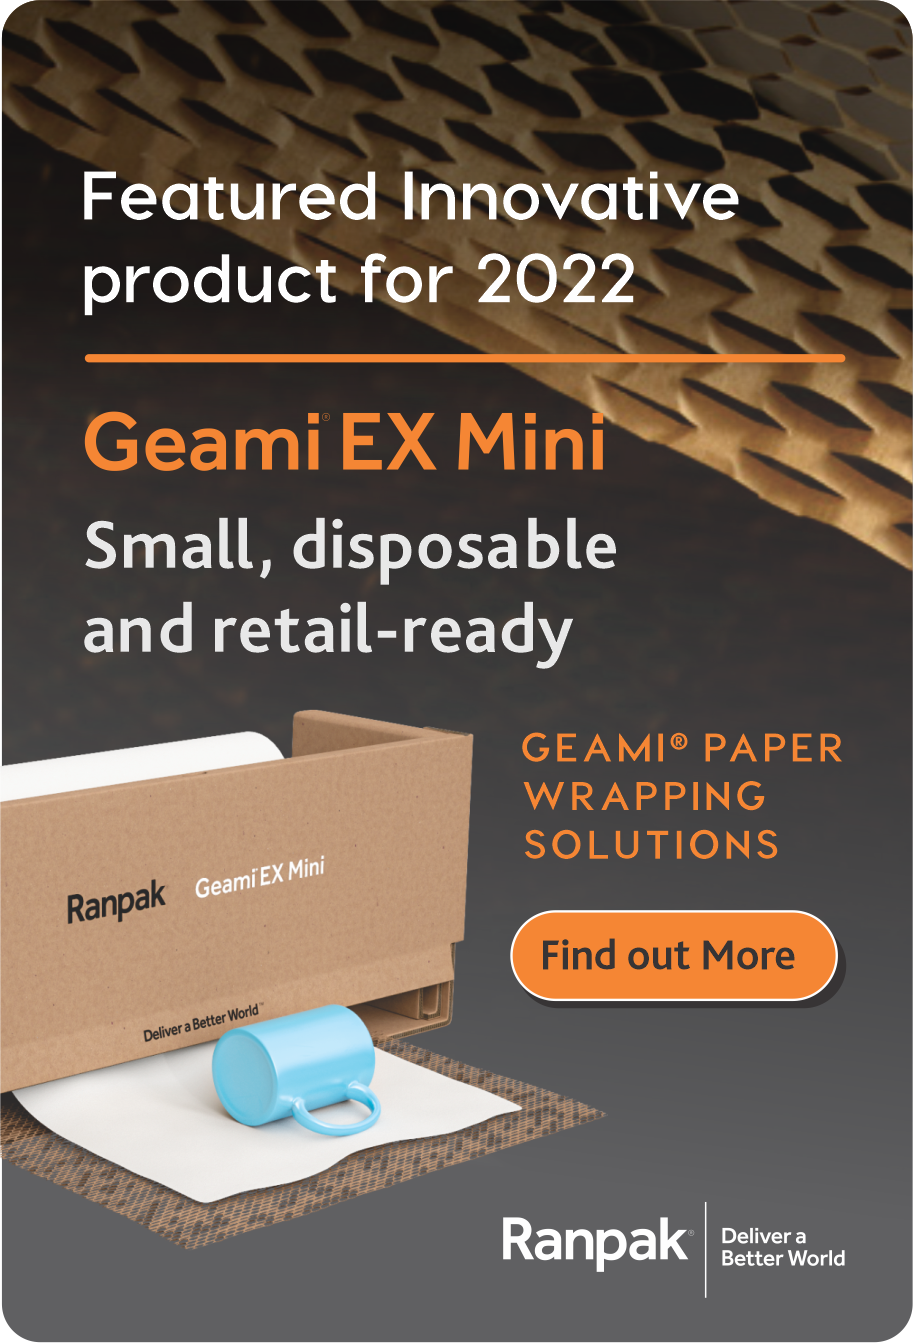 featured innovative product- Geami EX Mini